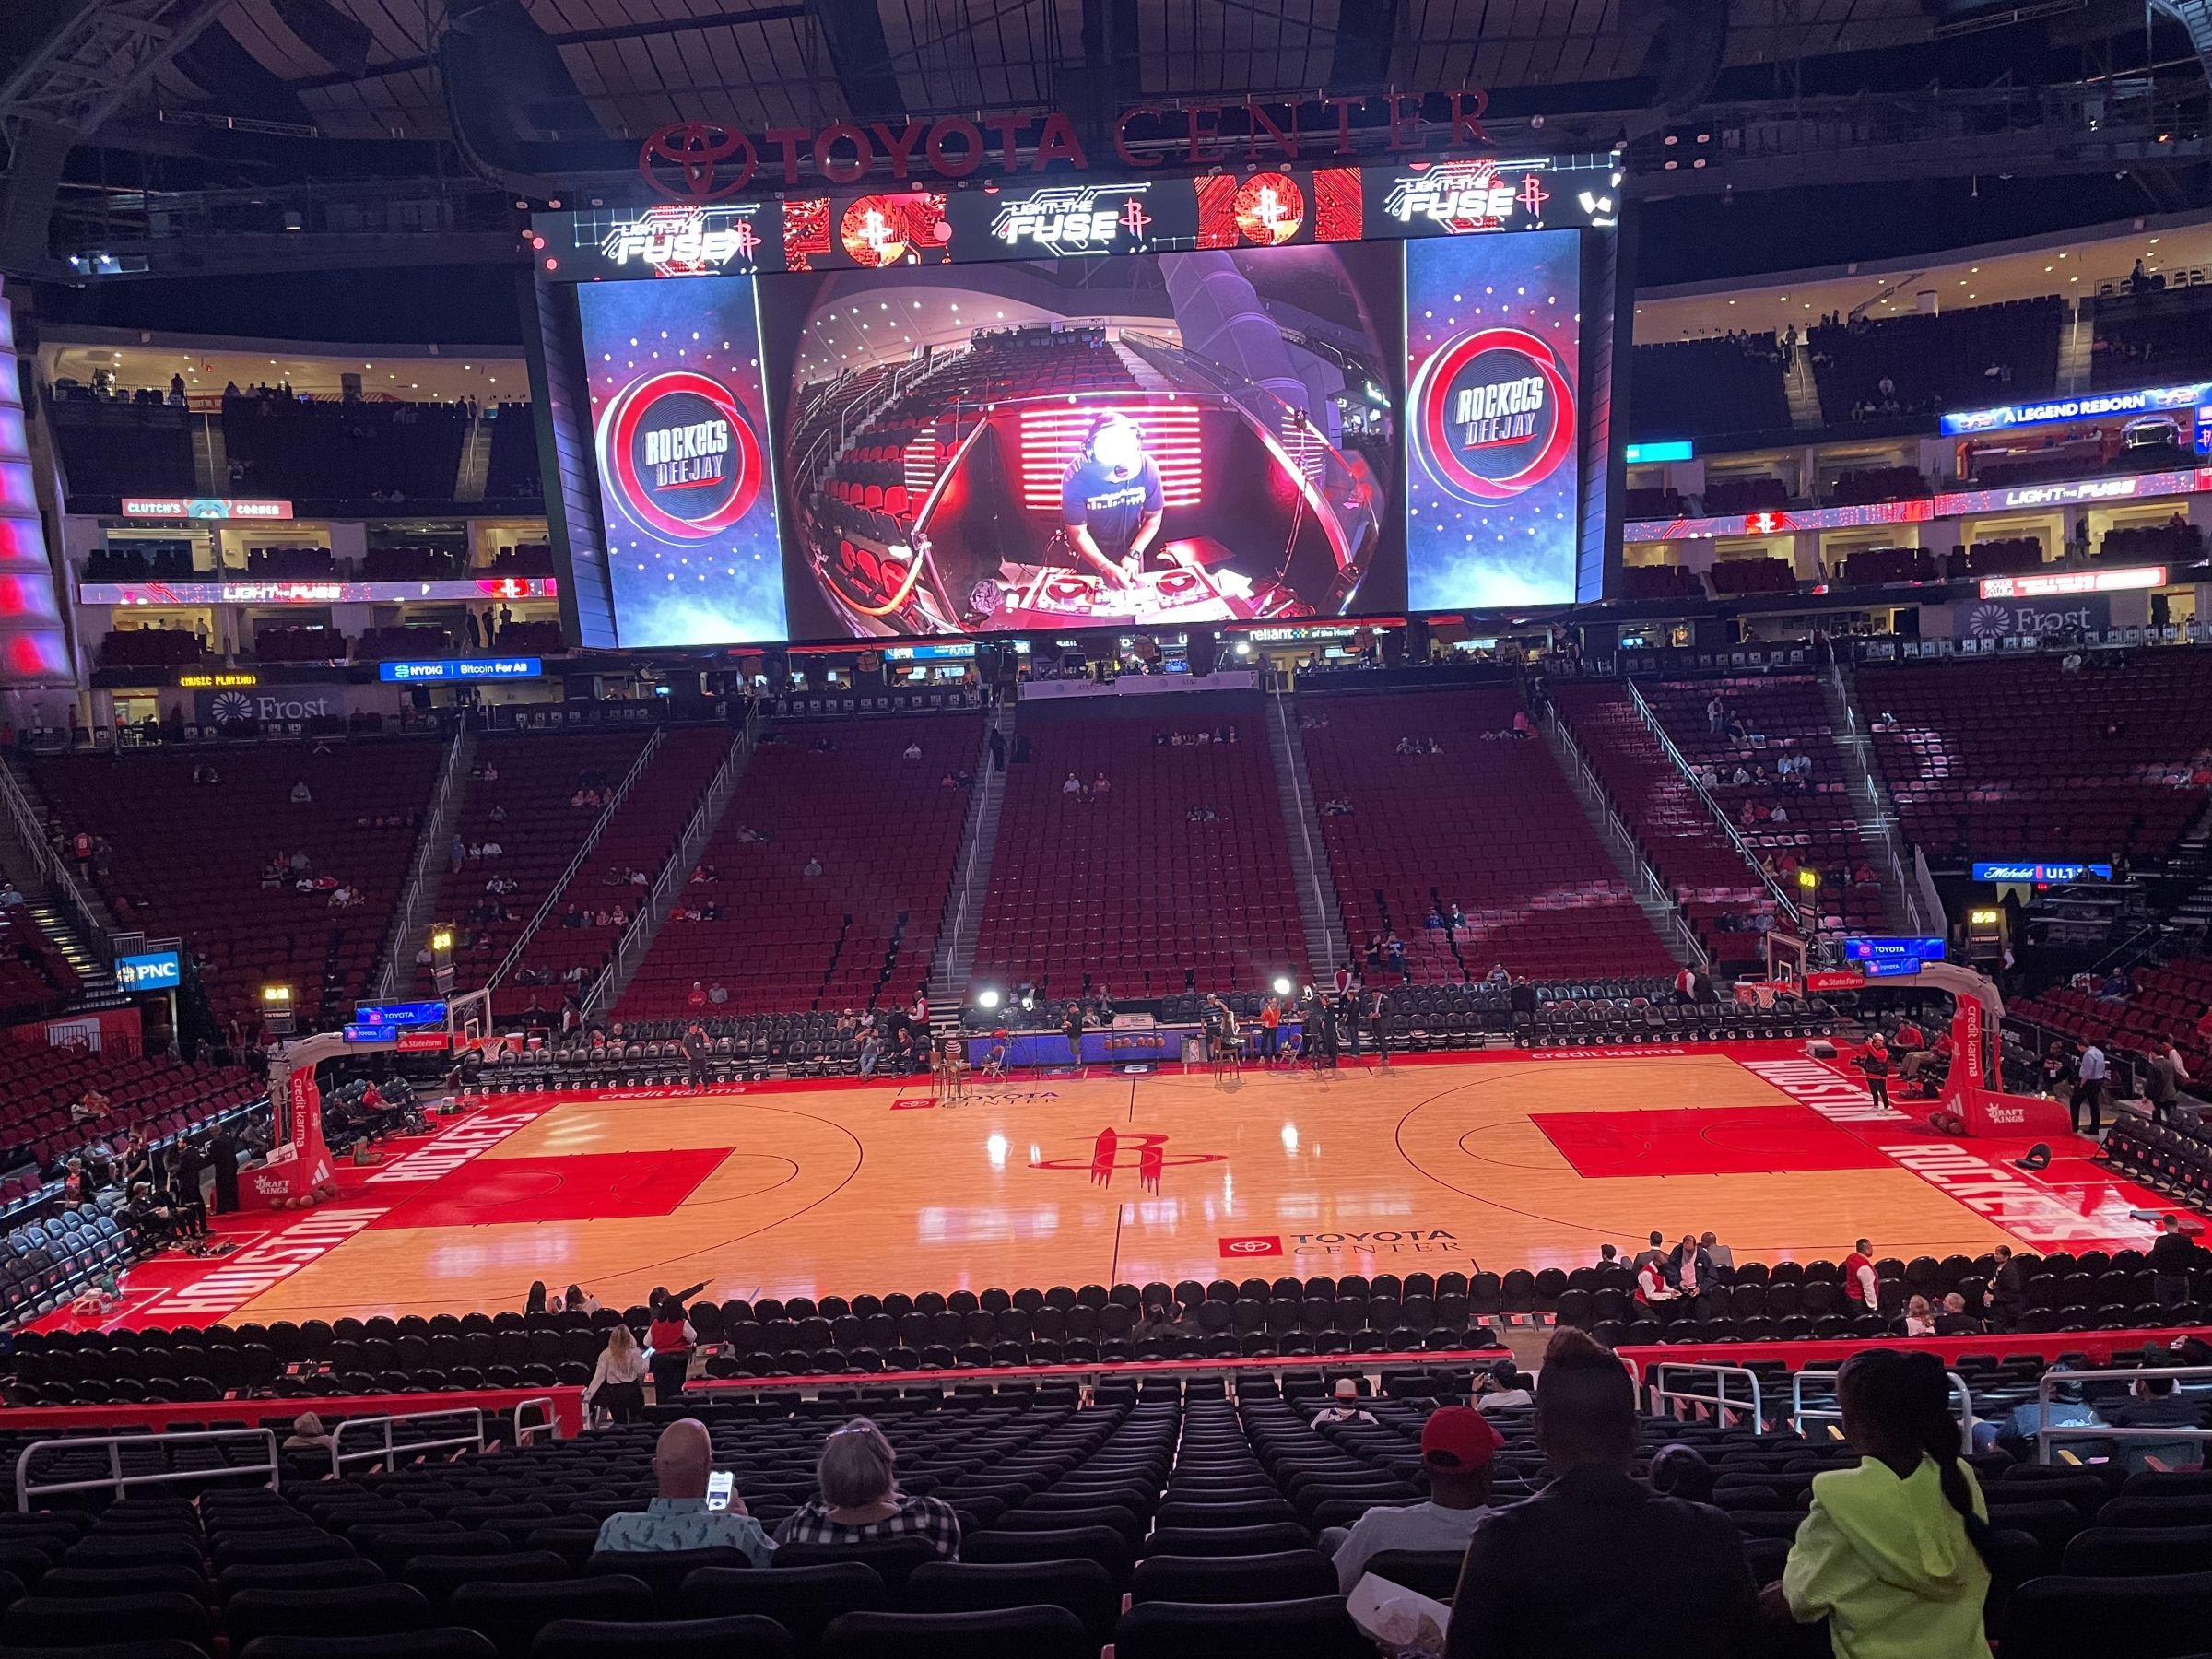 Section 107 At Toyota Center